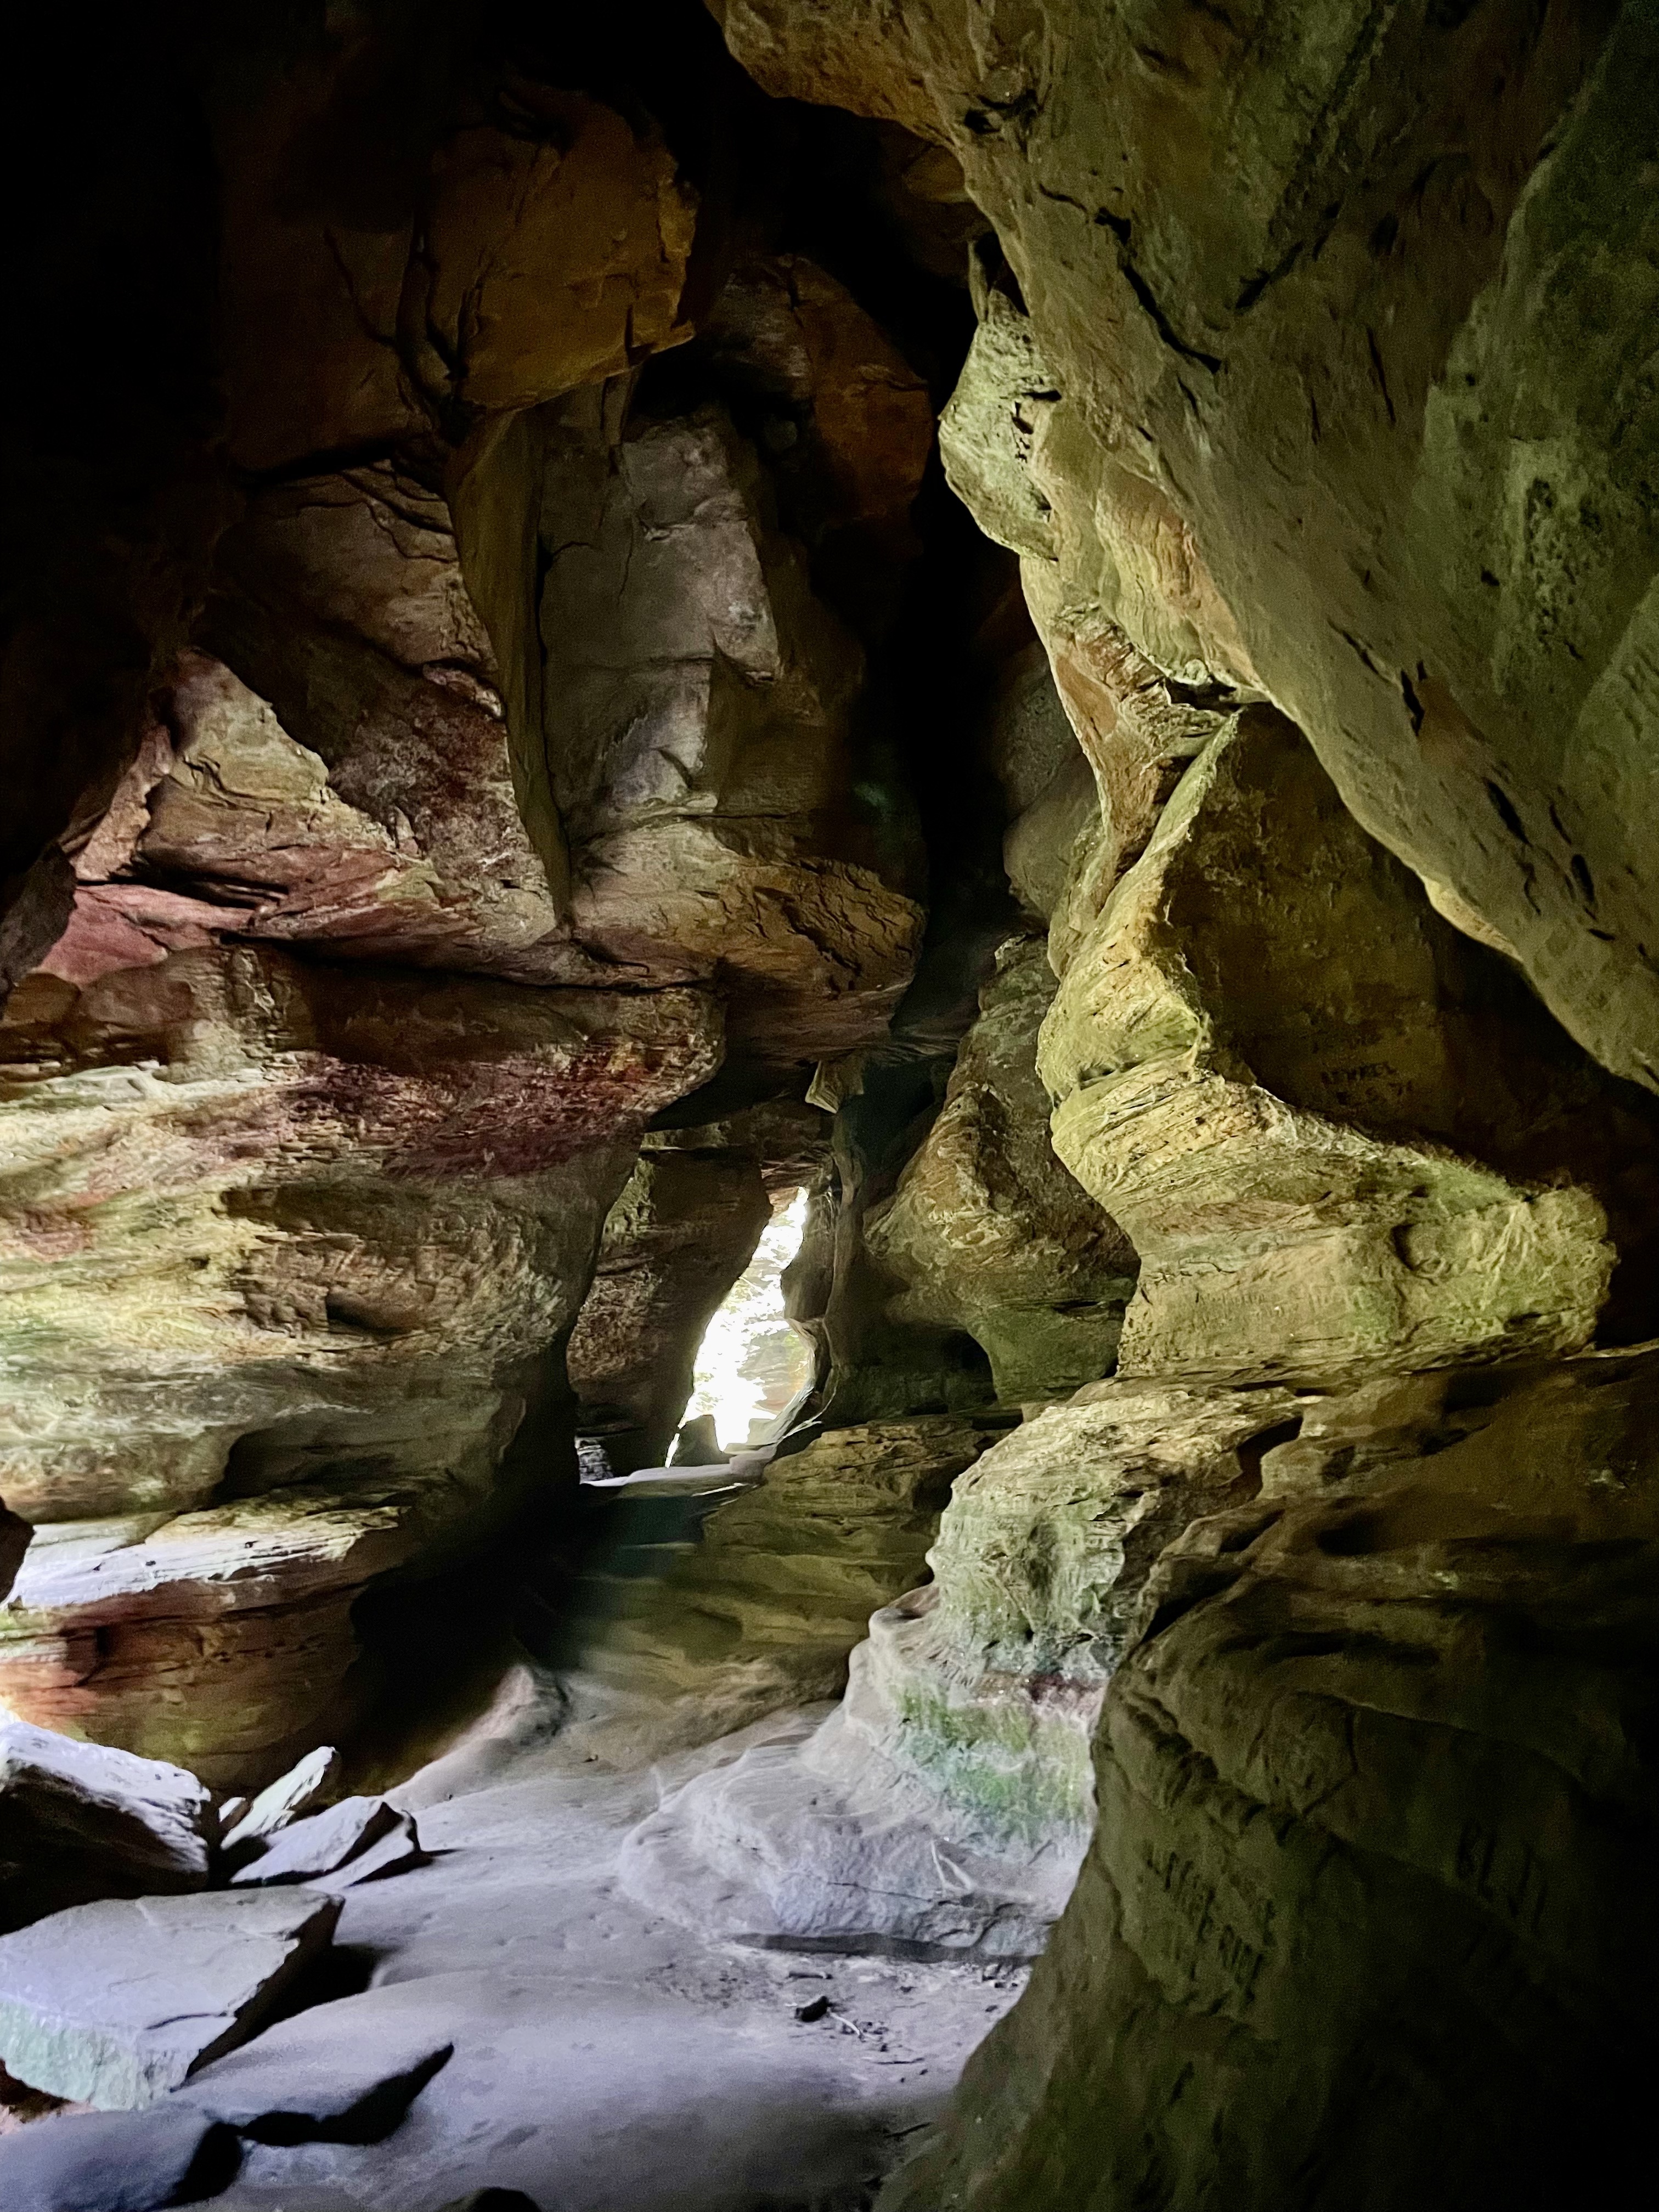 Best Hikes For Families in Hocking Hills